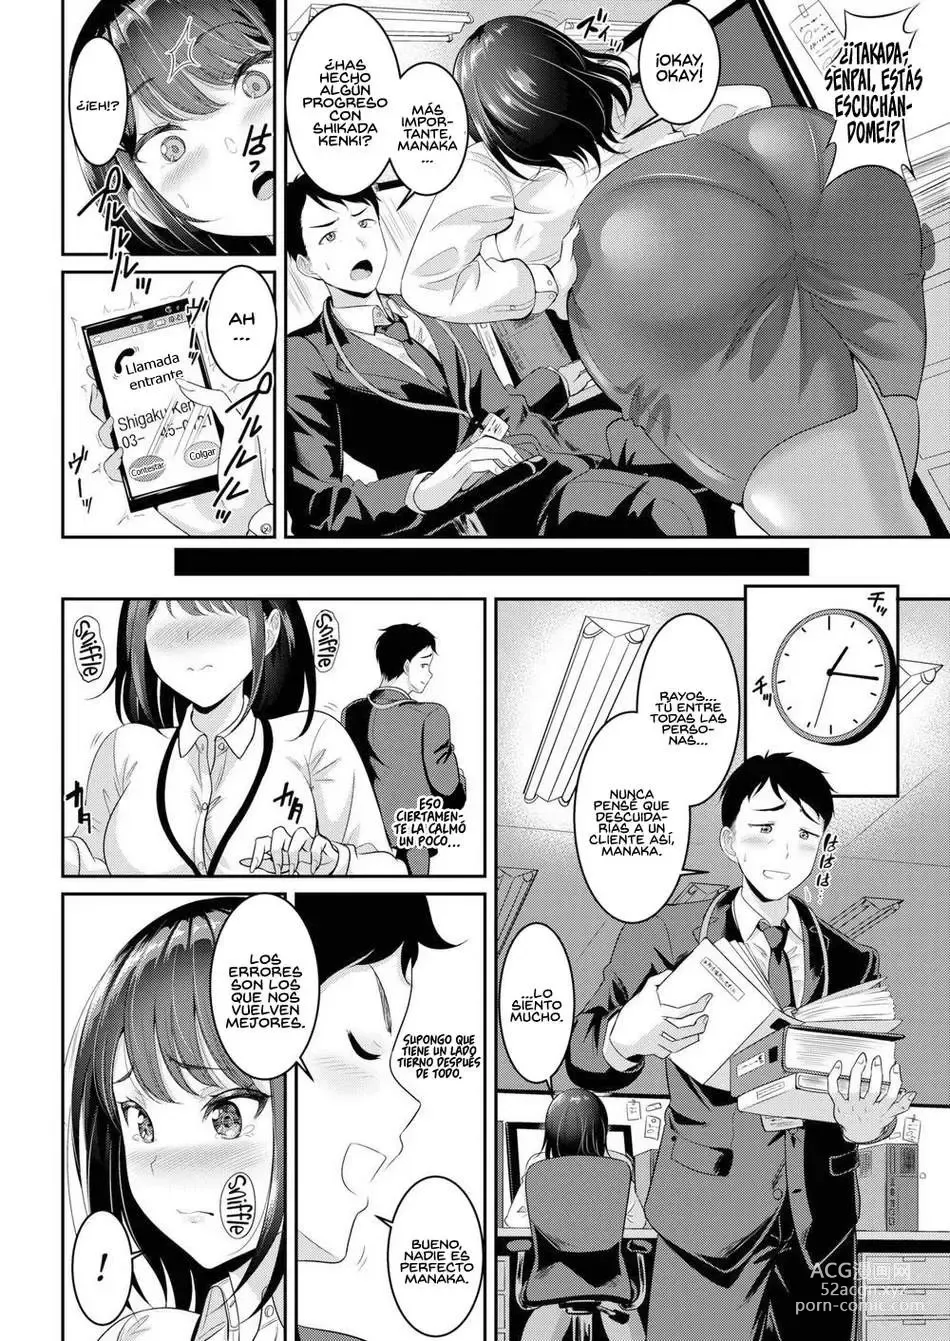 Page 2 of doujinshi Dreaming of your butt